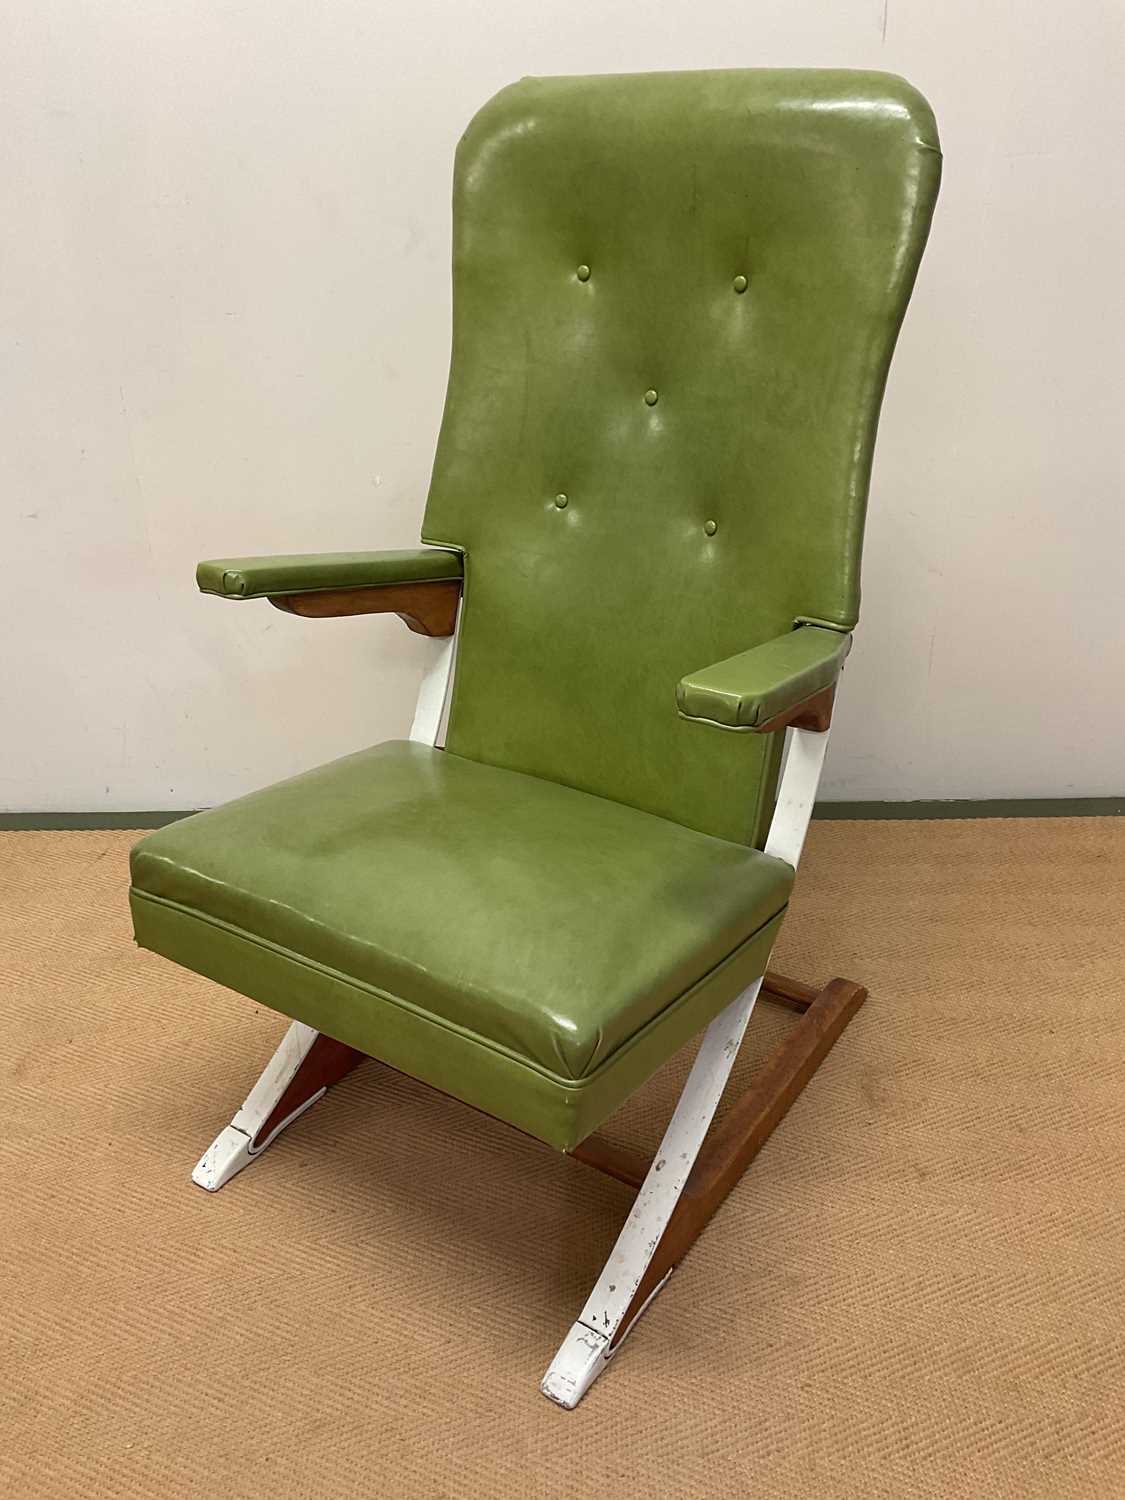 MCKAY; a 1960s American cantilever rocker chair upholstered in green faux leather material, height